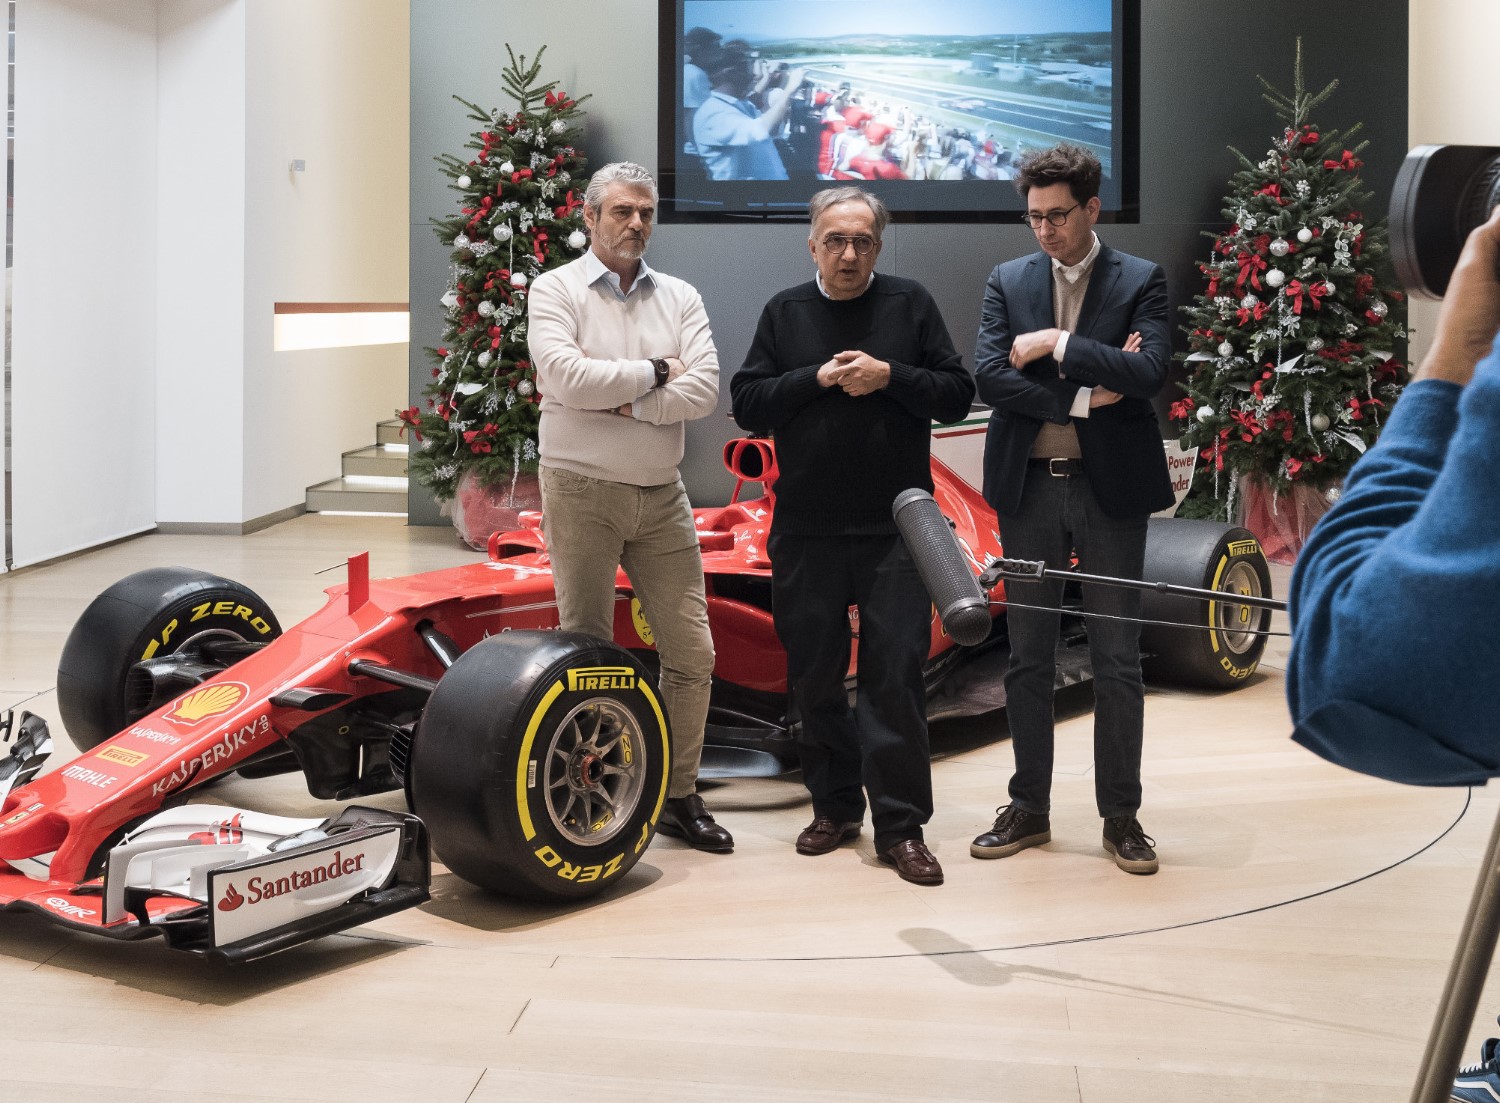 Arrivabene, Marchionne and Binotto greet the F1 media gang